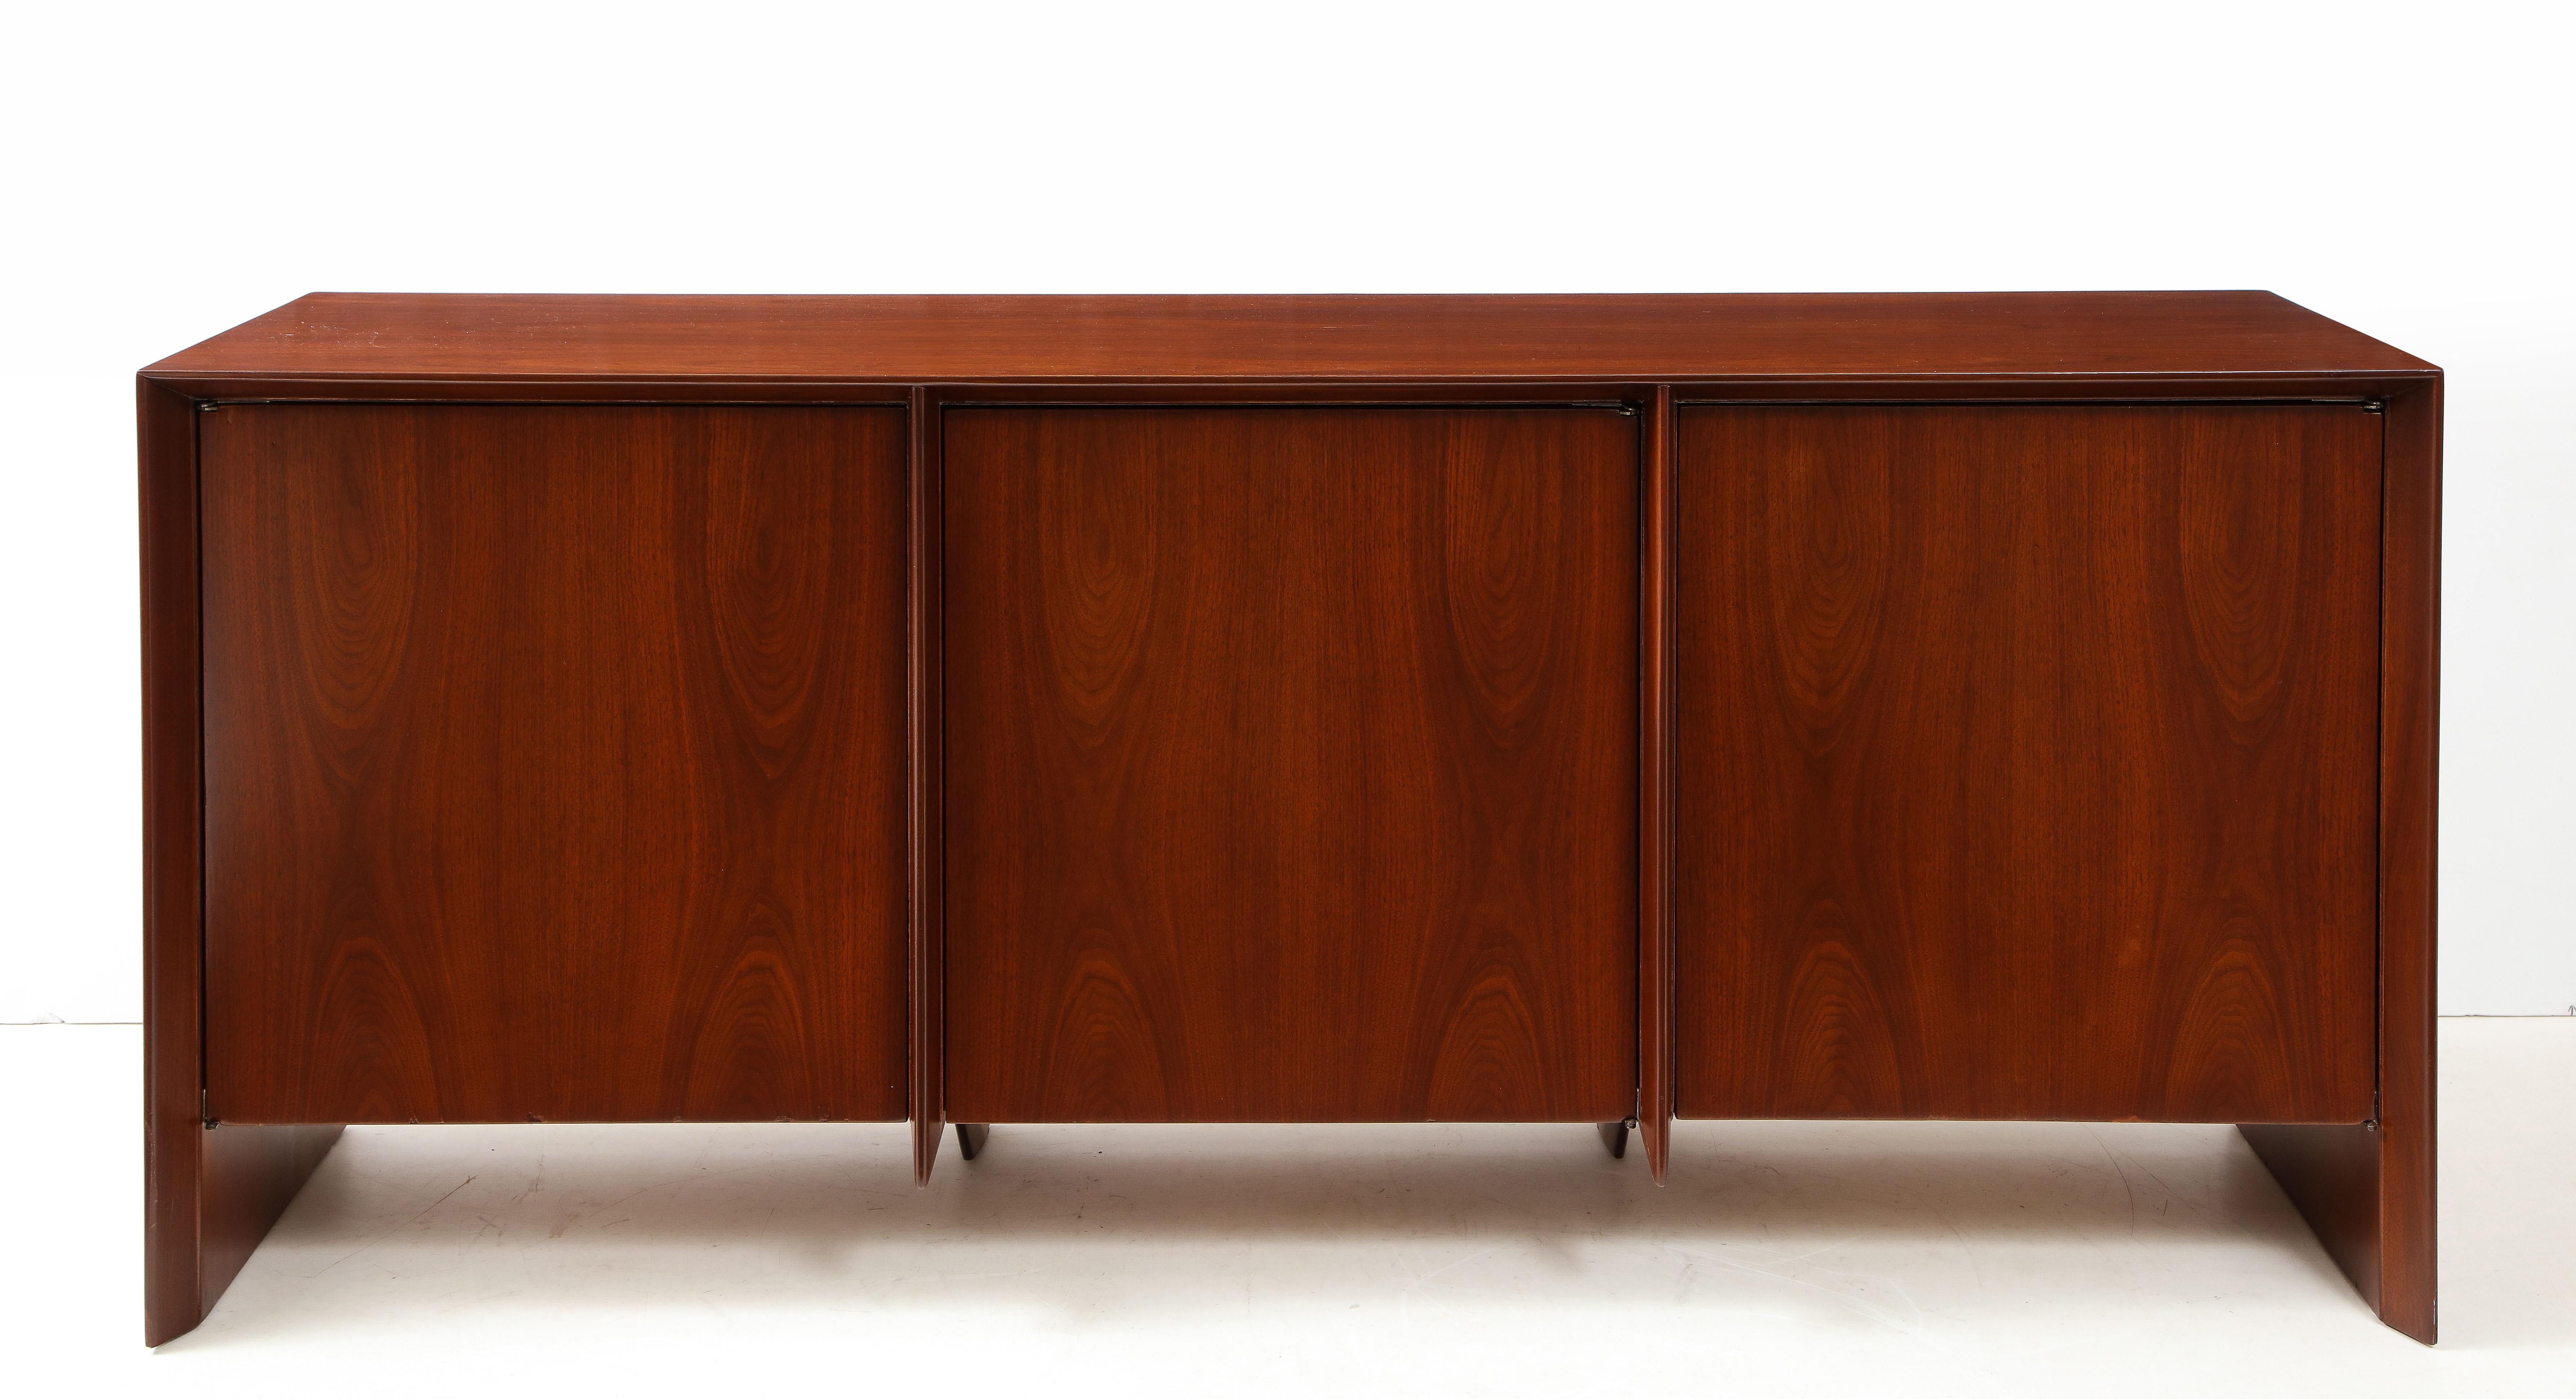 Stunning 1960s Robsjohn-Gibbings for Widdicomb walnut credenza. Newly refinished with 6 drawers and two adjustable shelves.